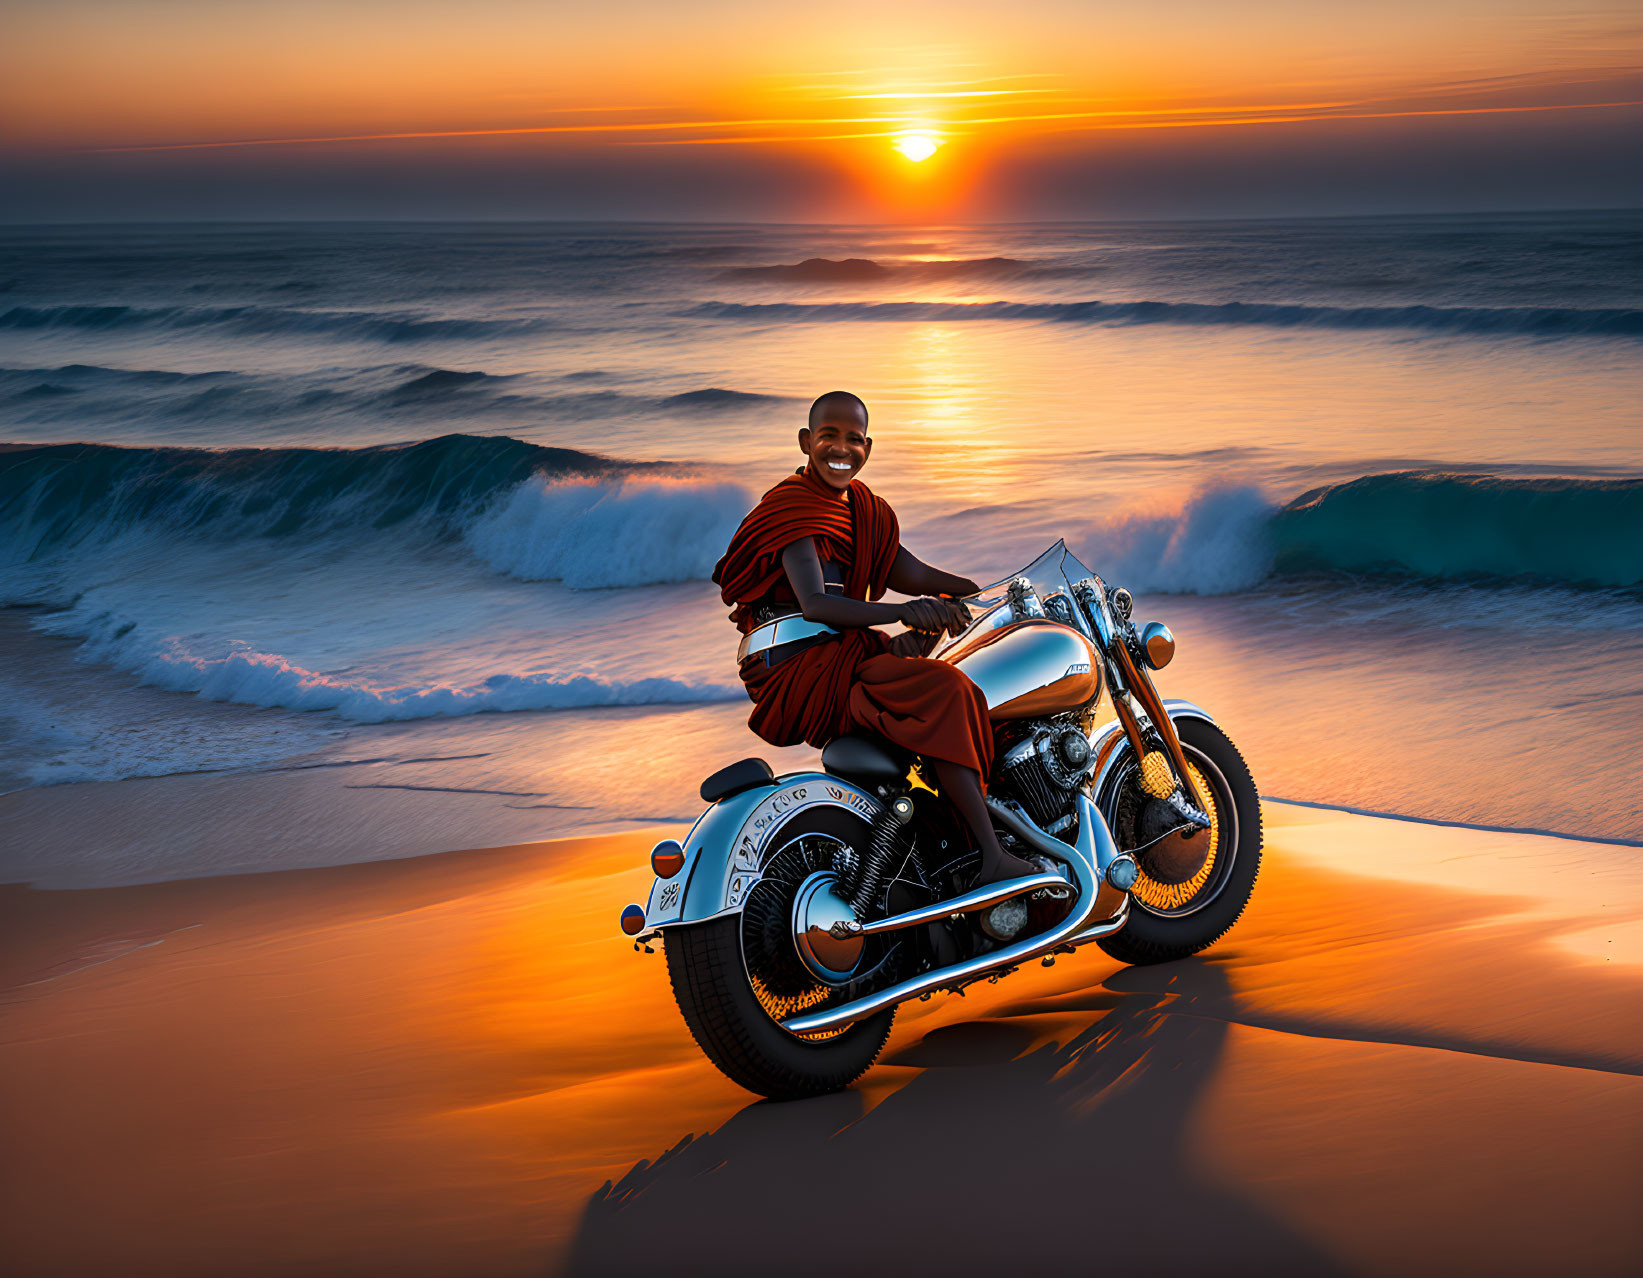 Monk in robe on motorcycle at beach sunset with crashing waves